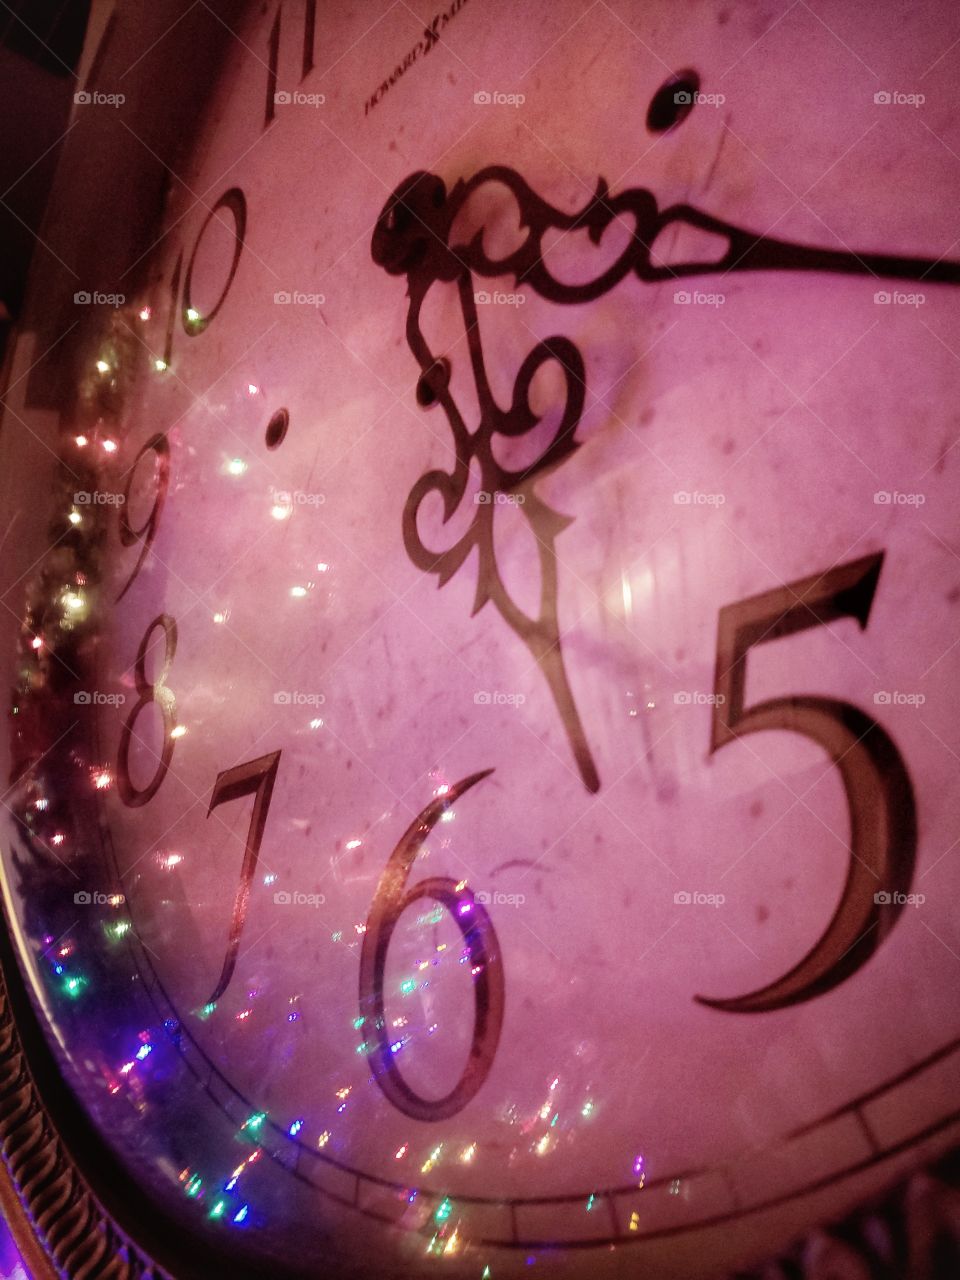 Grandfather clock during the holidays